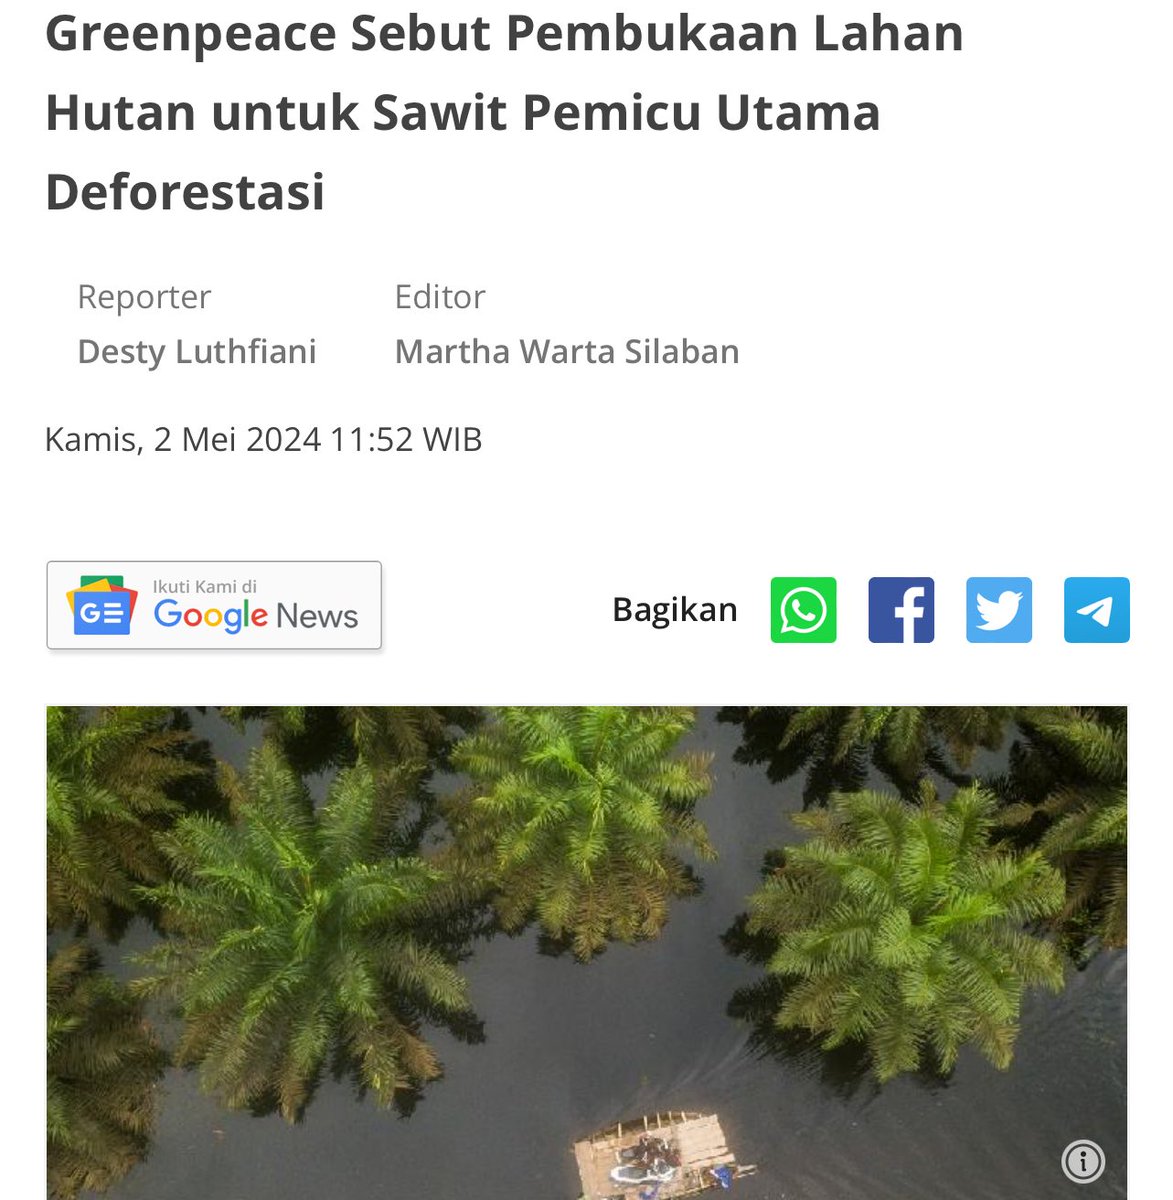 “From 2001 to 2019, 870,000 hectares of primary forest have been converted to oil palm plantations in Indonesia. The total estimated carbon stock lost is 104 million tonnes, equivalent to 382 million tonnes of CO2 emissions.' bisnis.tempo.co/read/1863121/g…